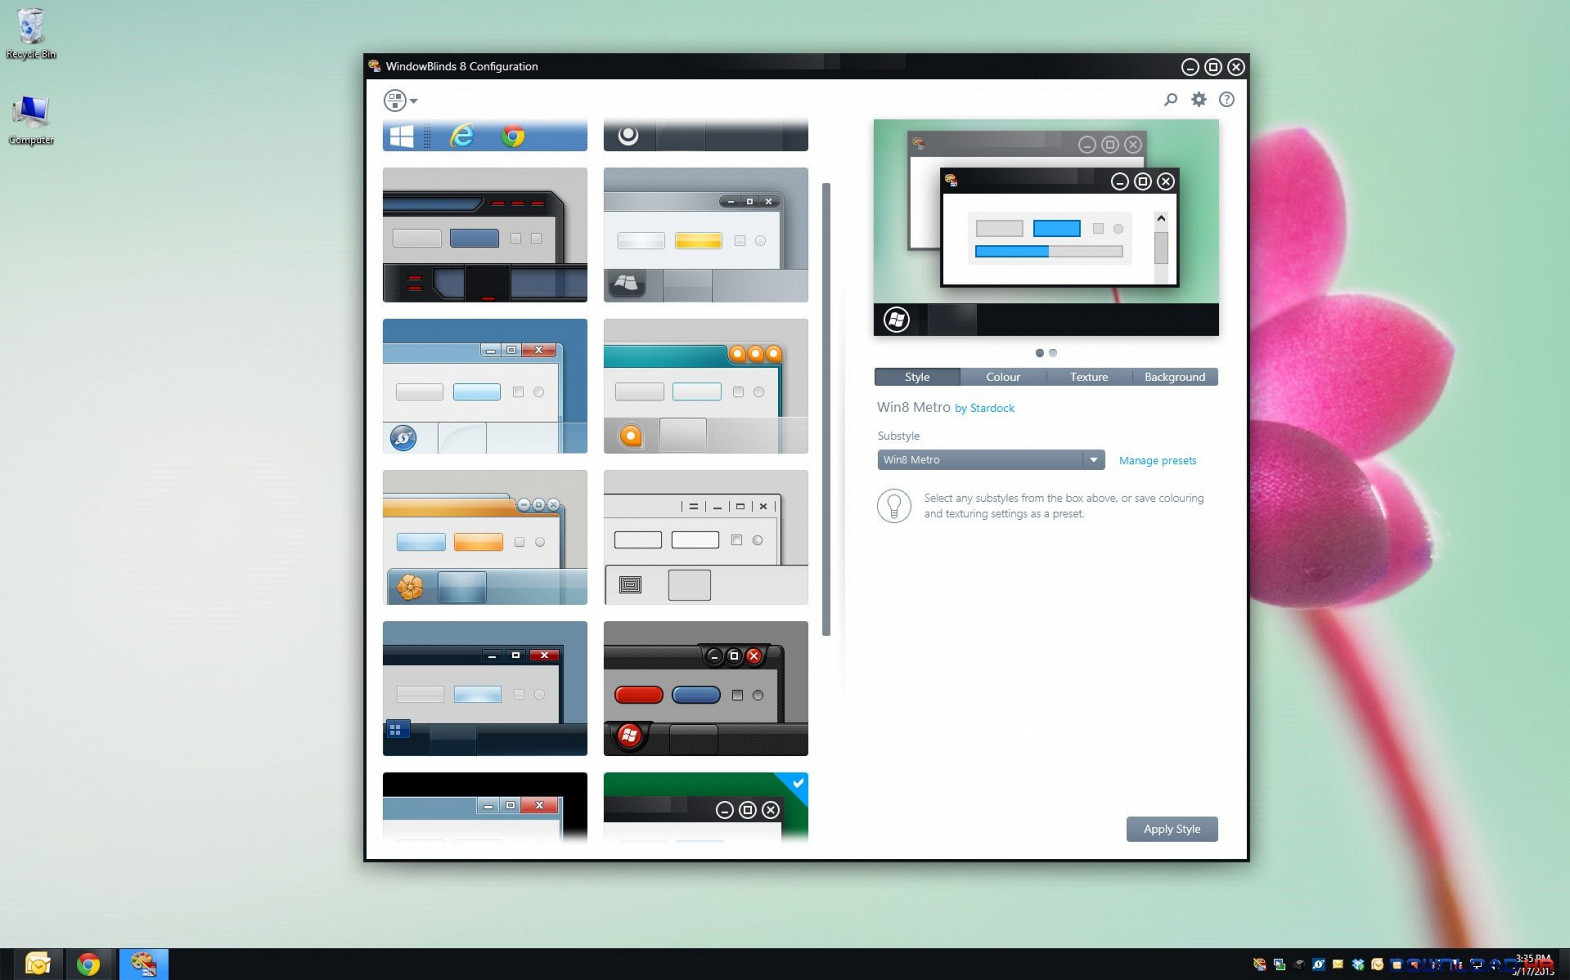 beos theme for windowblinds